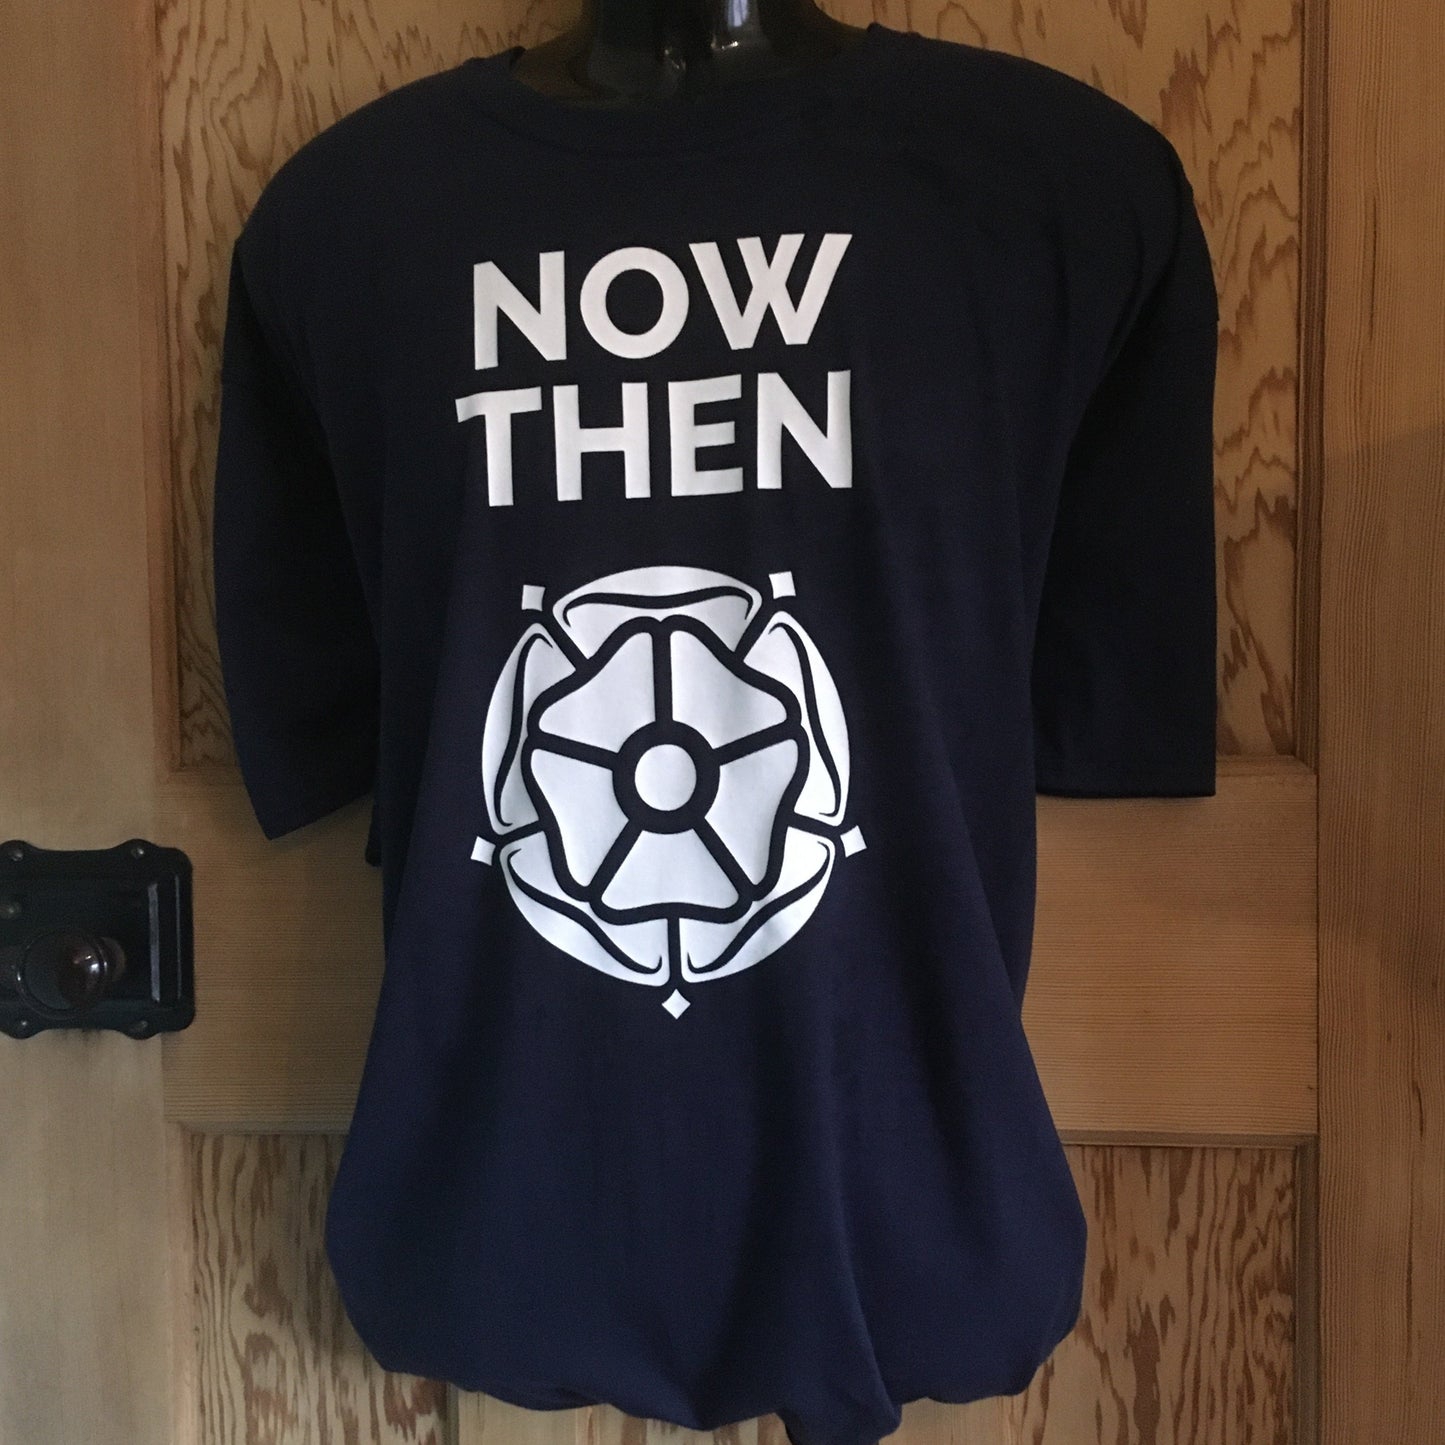 Now Then T-Shirt